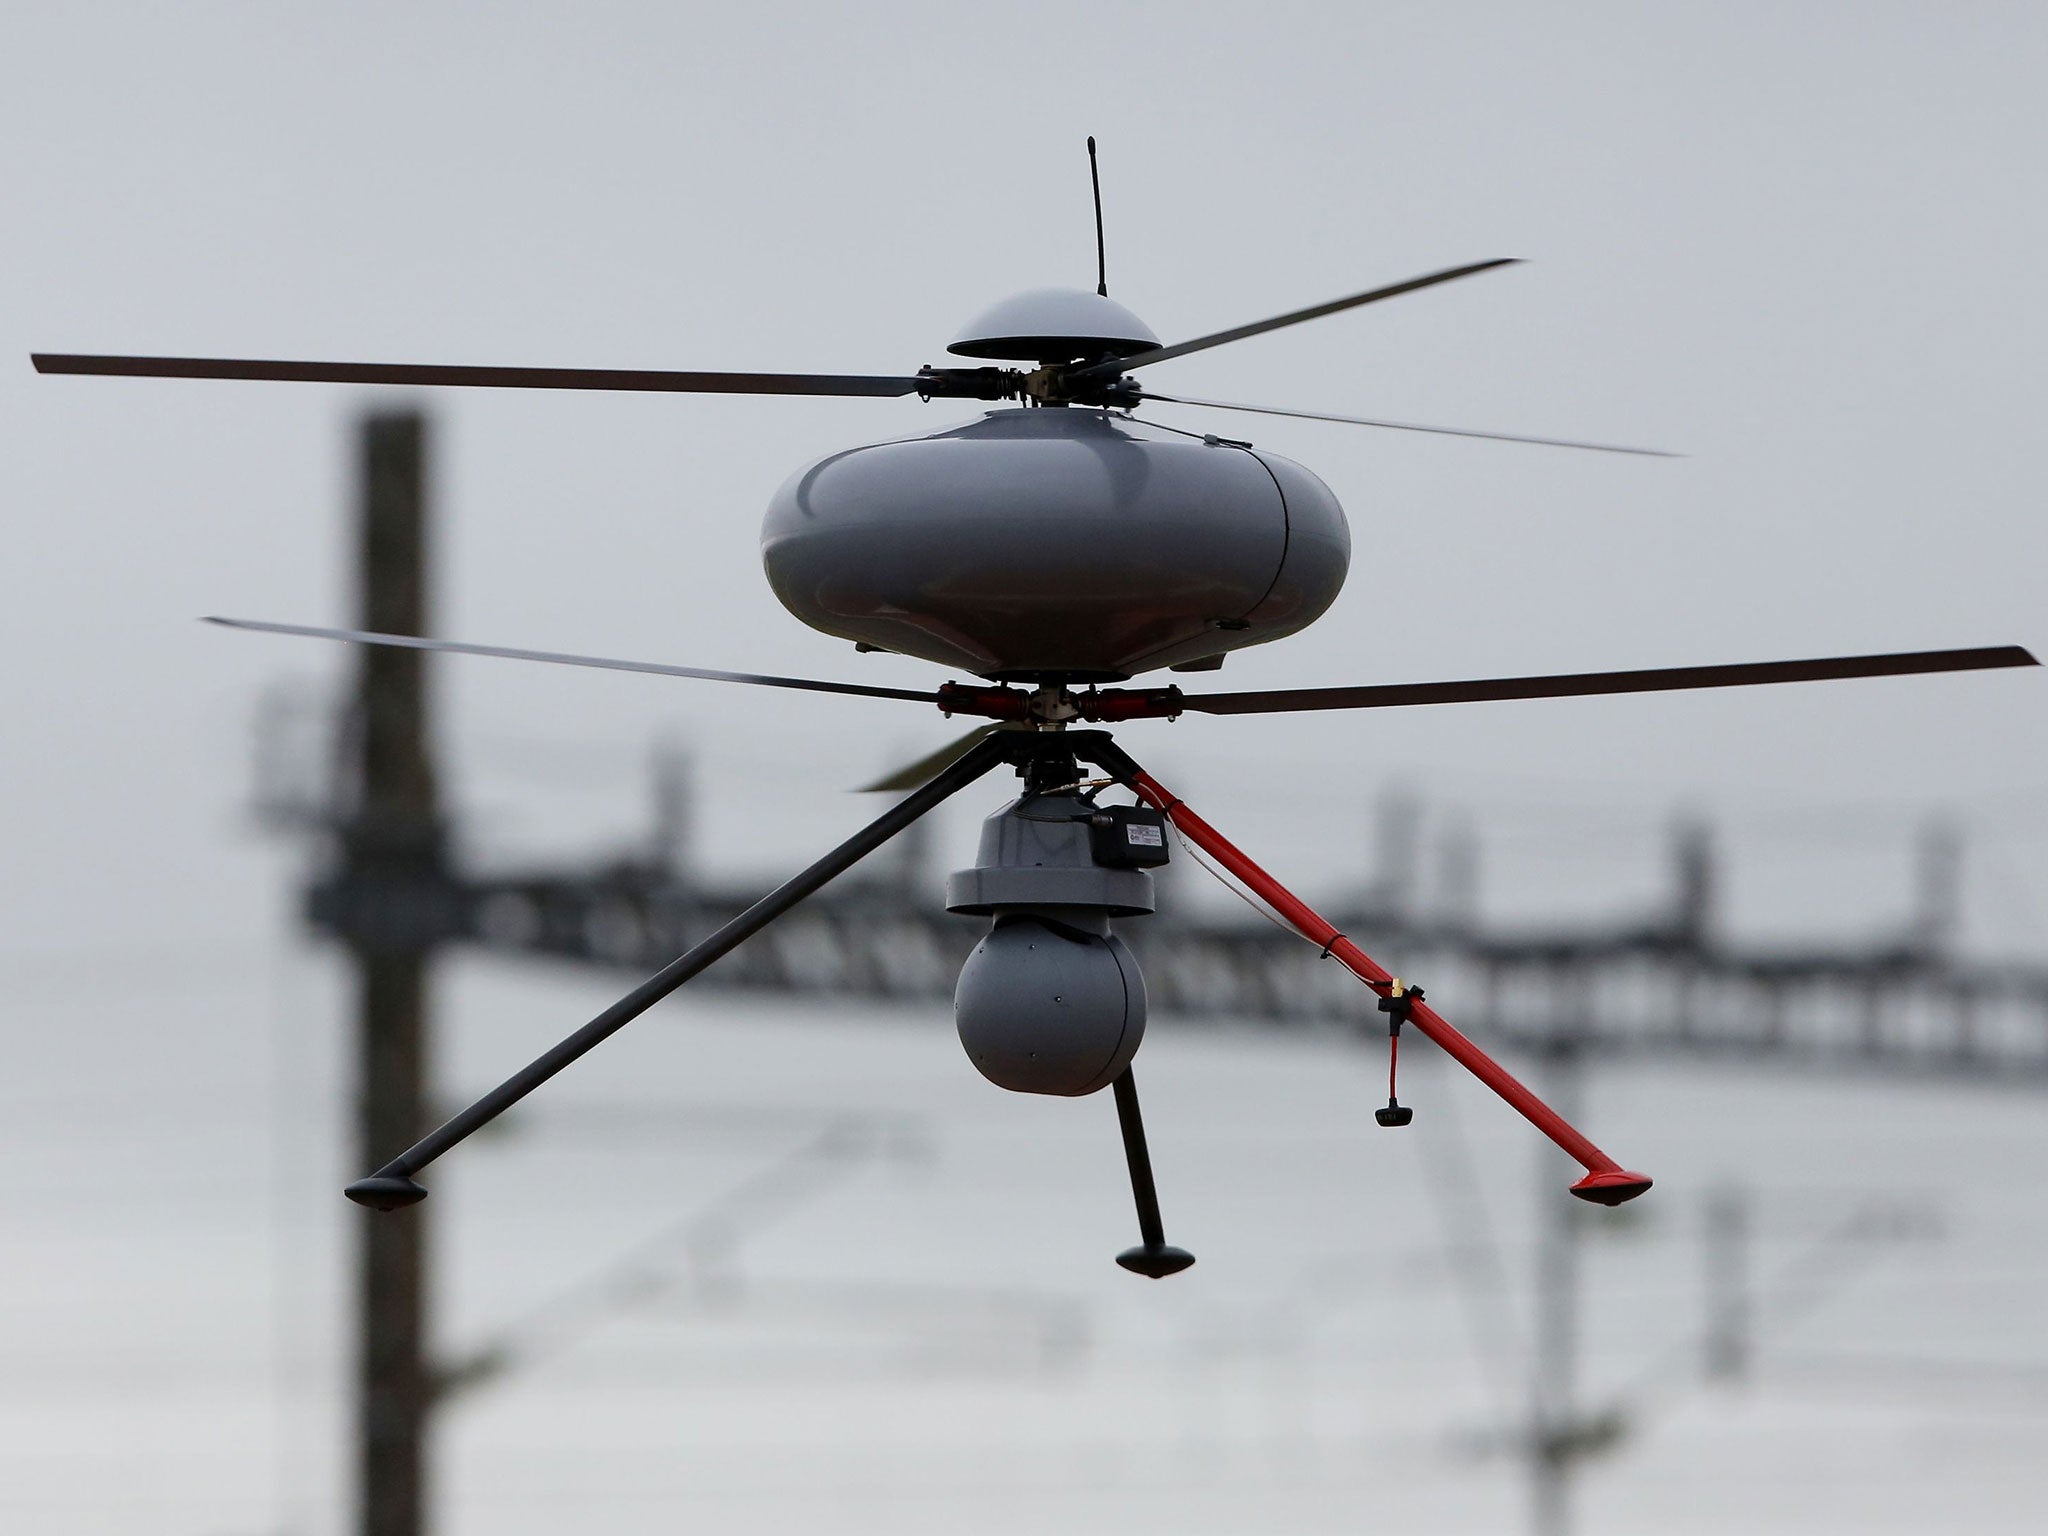 A new security drone flies over the Eurotunnel in Calais, France, on 27 June